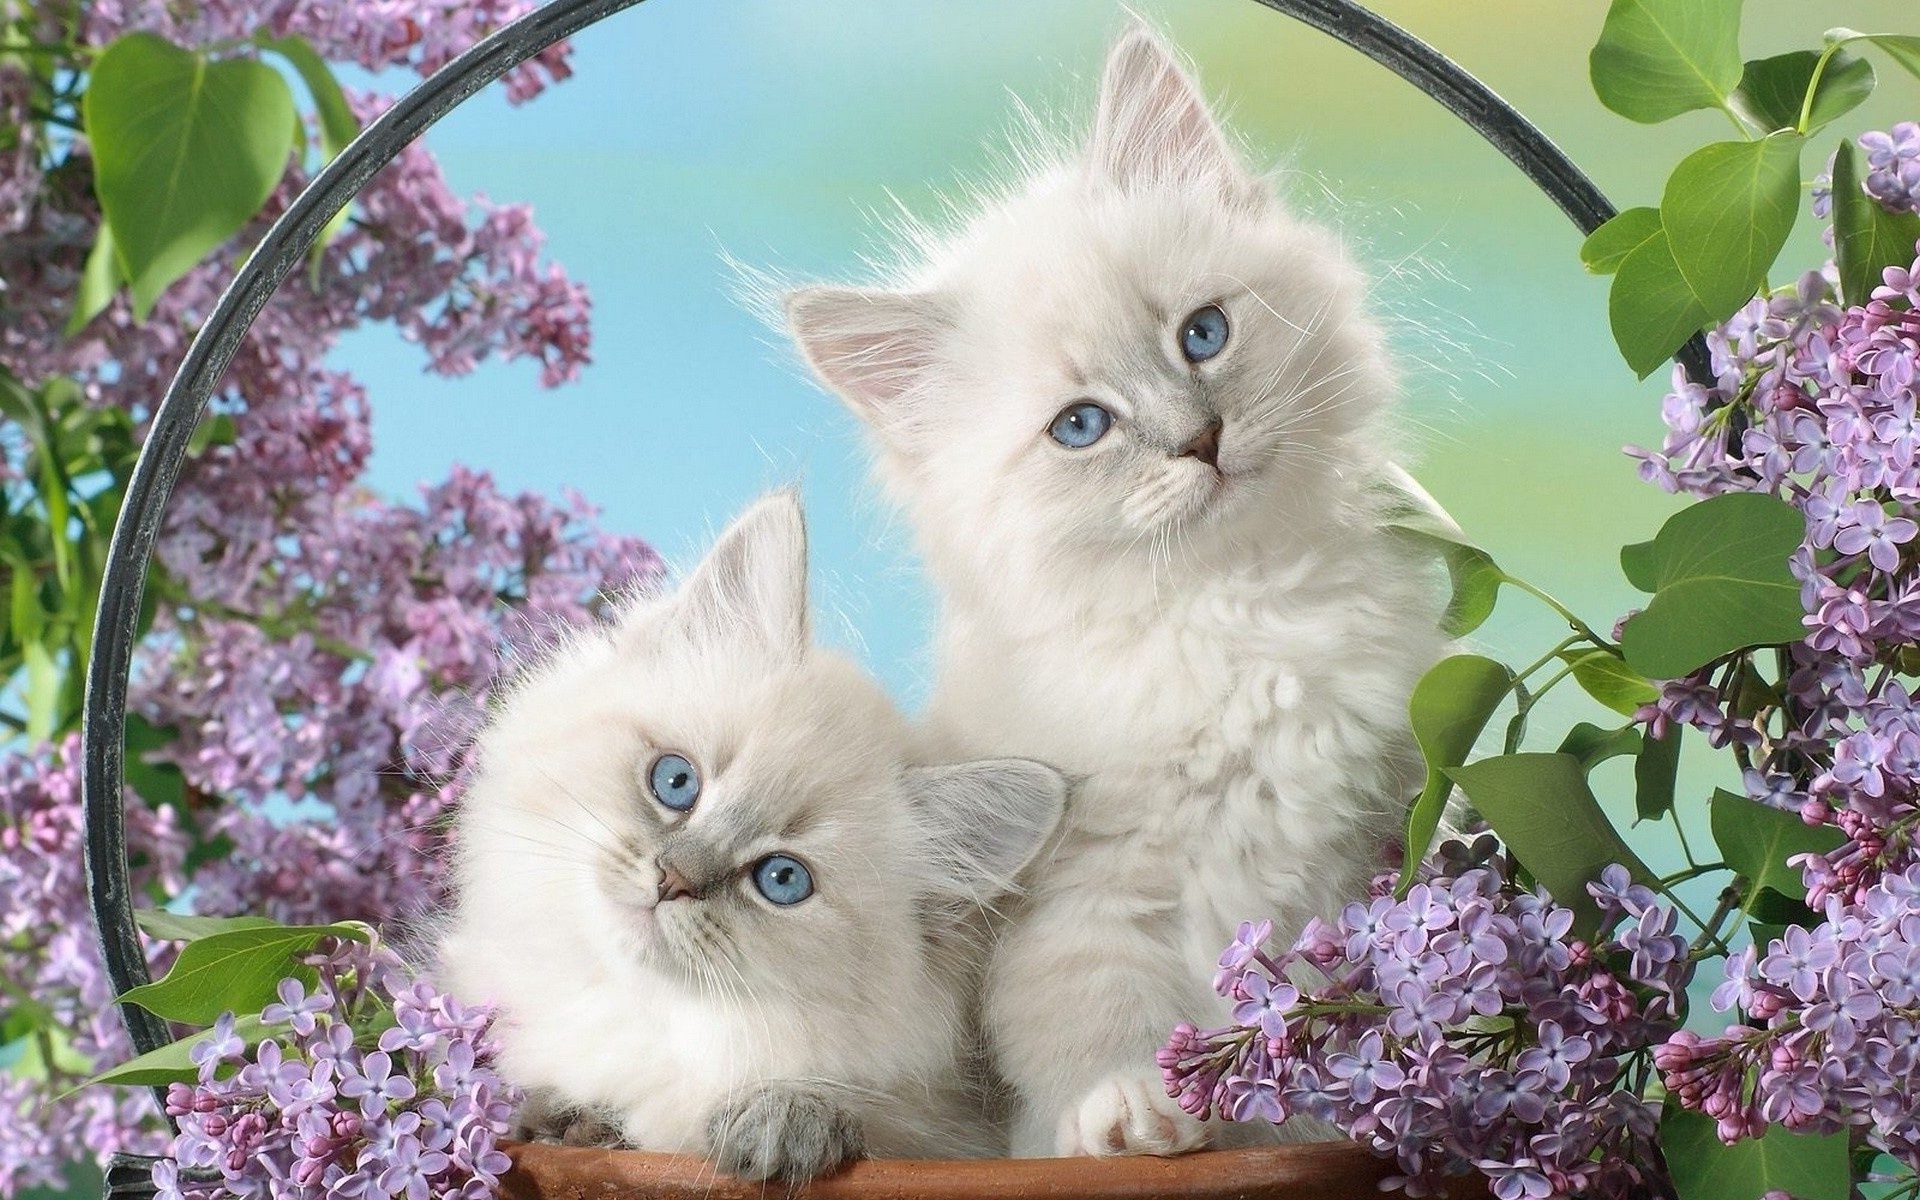 Fluffy White Kittens With Blue Eyes Surrounded By Sira Free Wallpapers